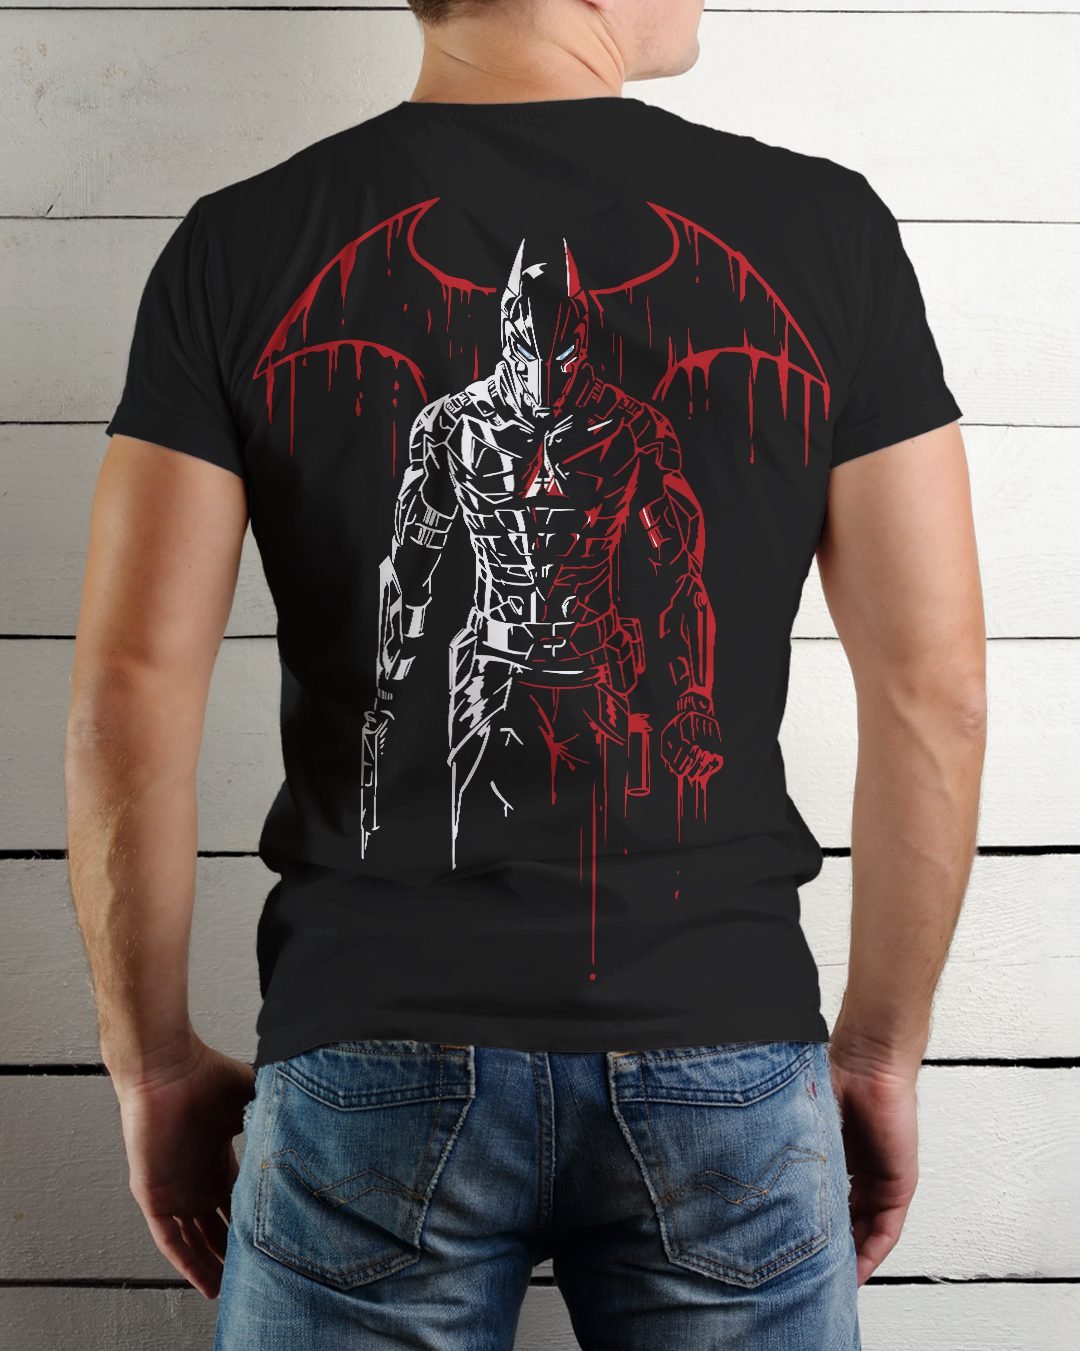 Punisher Graphic Printed Front and Back Printed Cotton Black T-Shirts